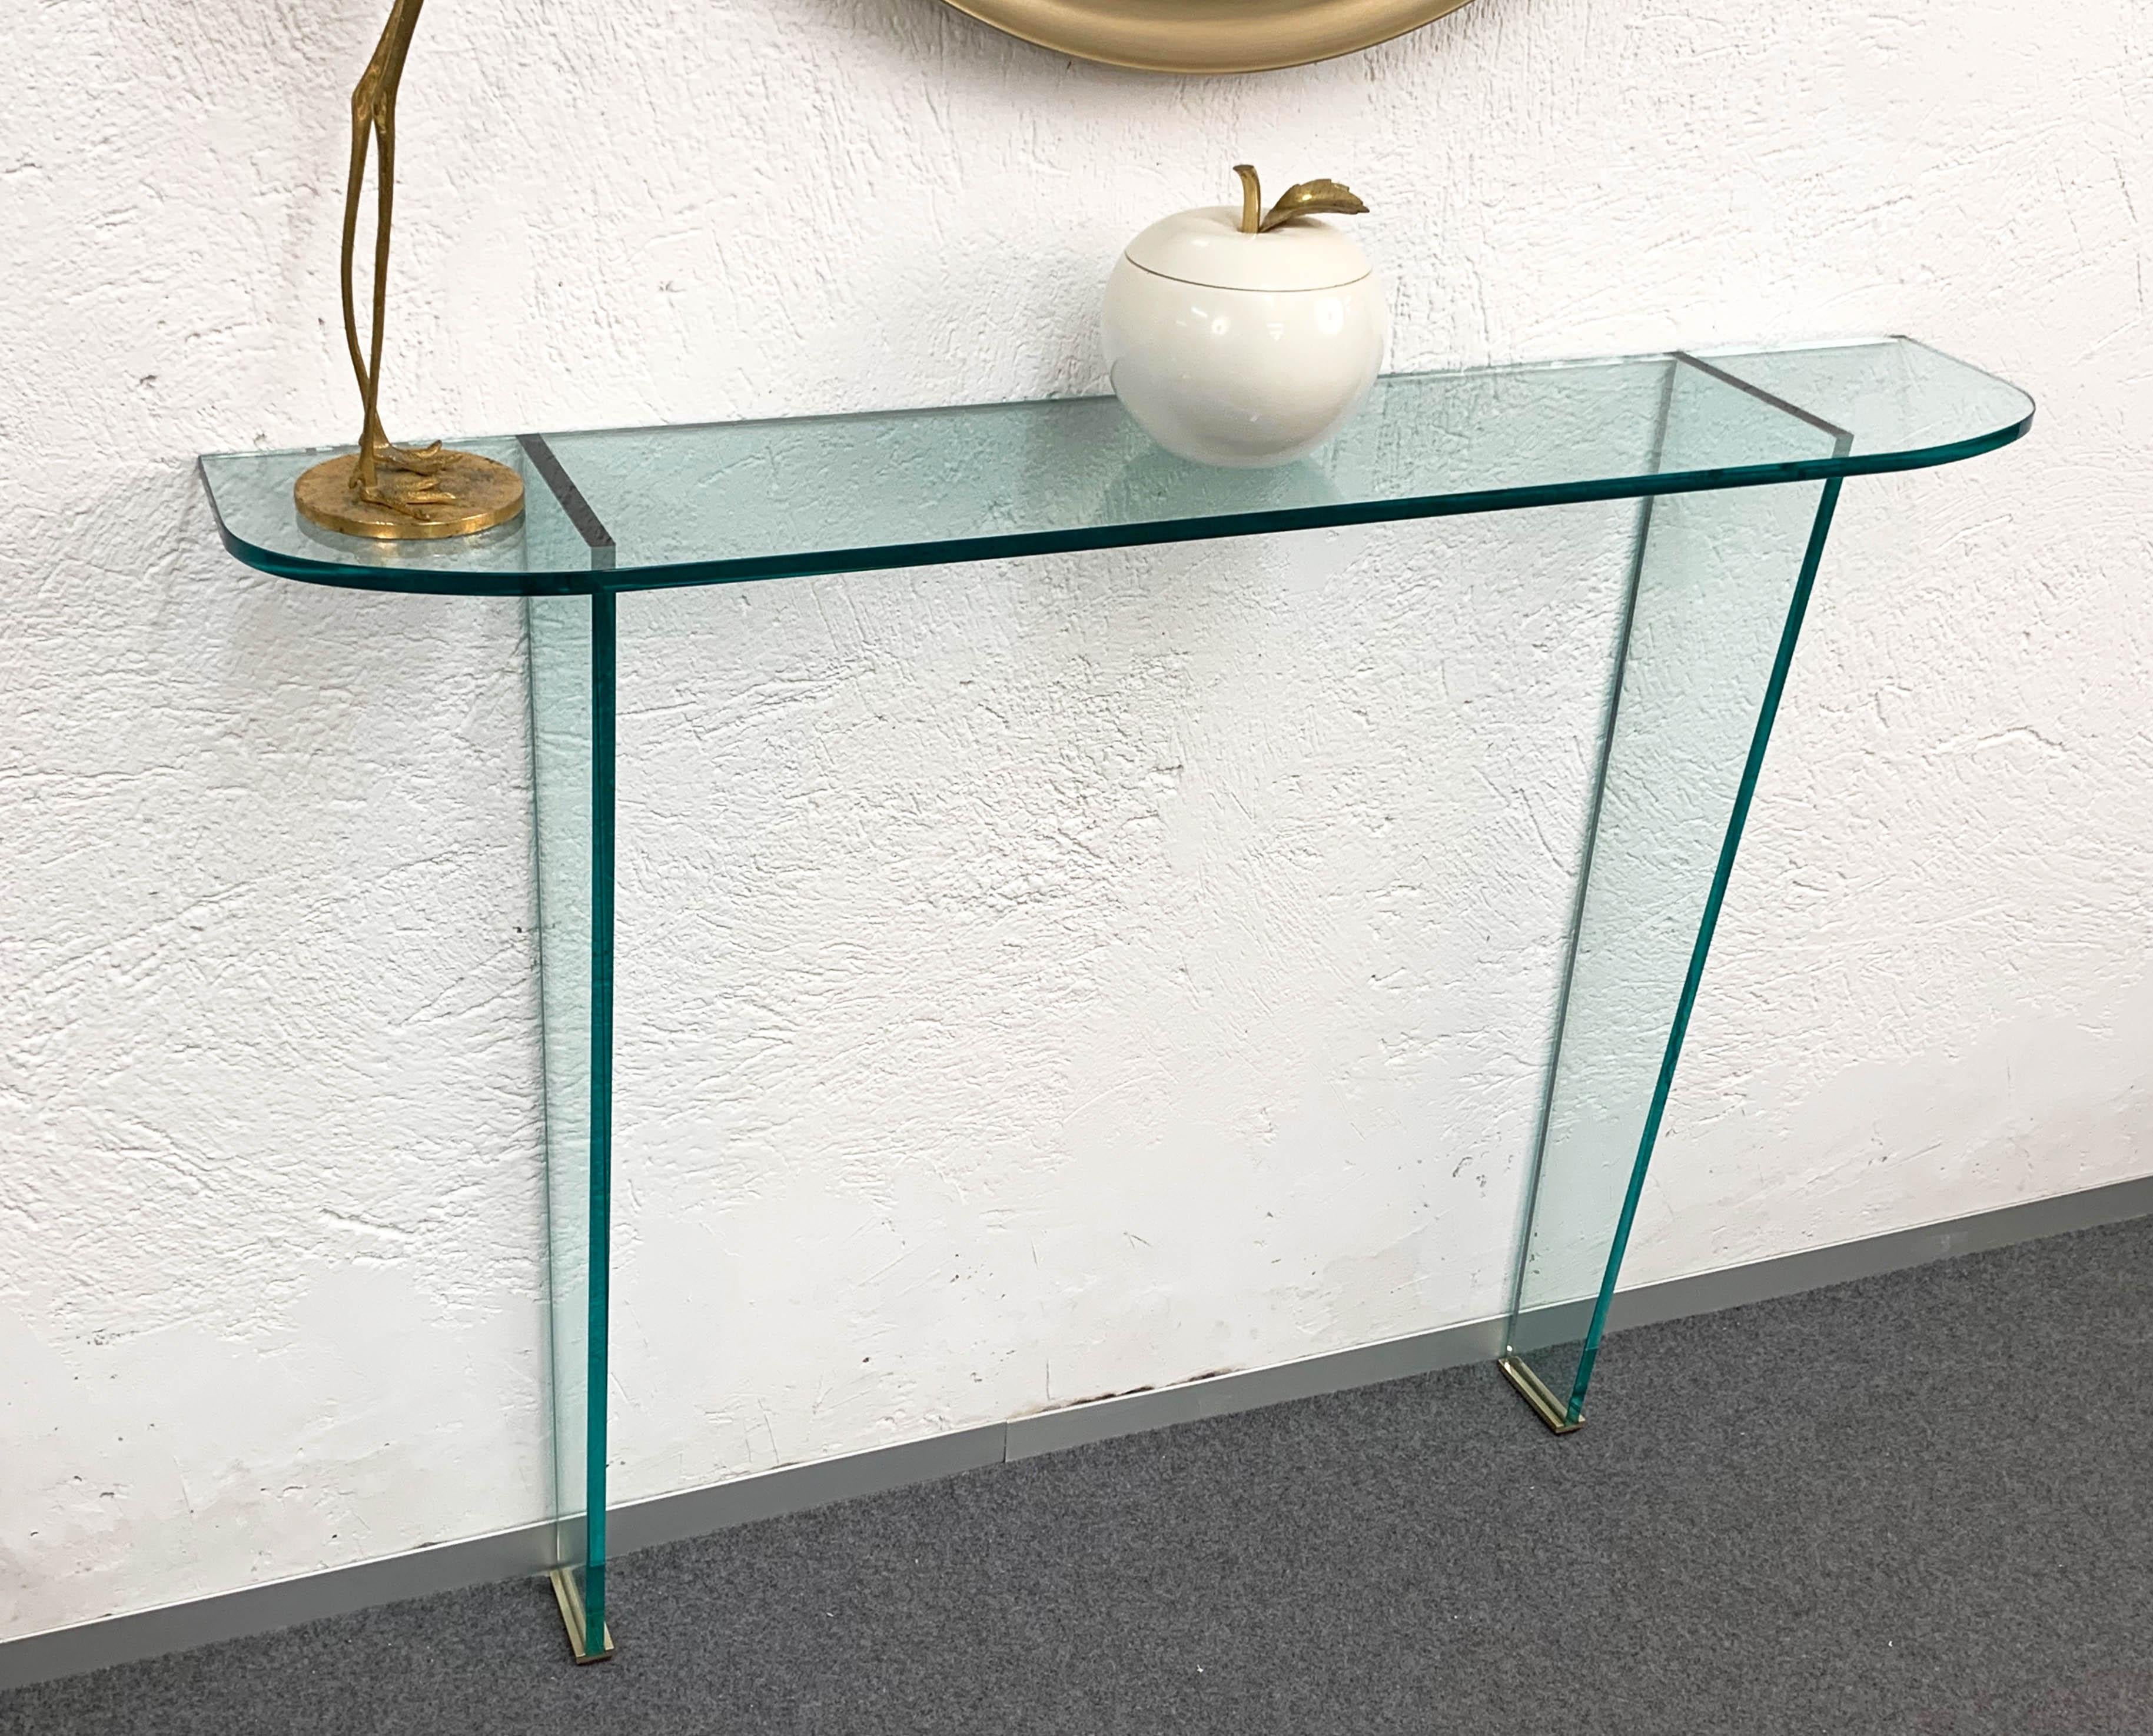 Wonderful midcentury glass console attributed to Pietro Chiesa for Fontana Arte. 

The inner elegance of this astonishing piece is given by the glass composition purity mixed with the brass finishes.

This item is a timeless classic that will